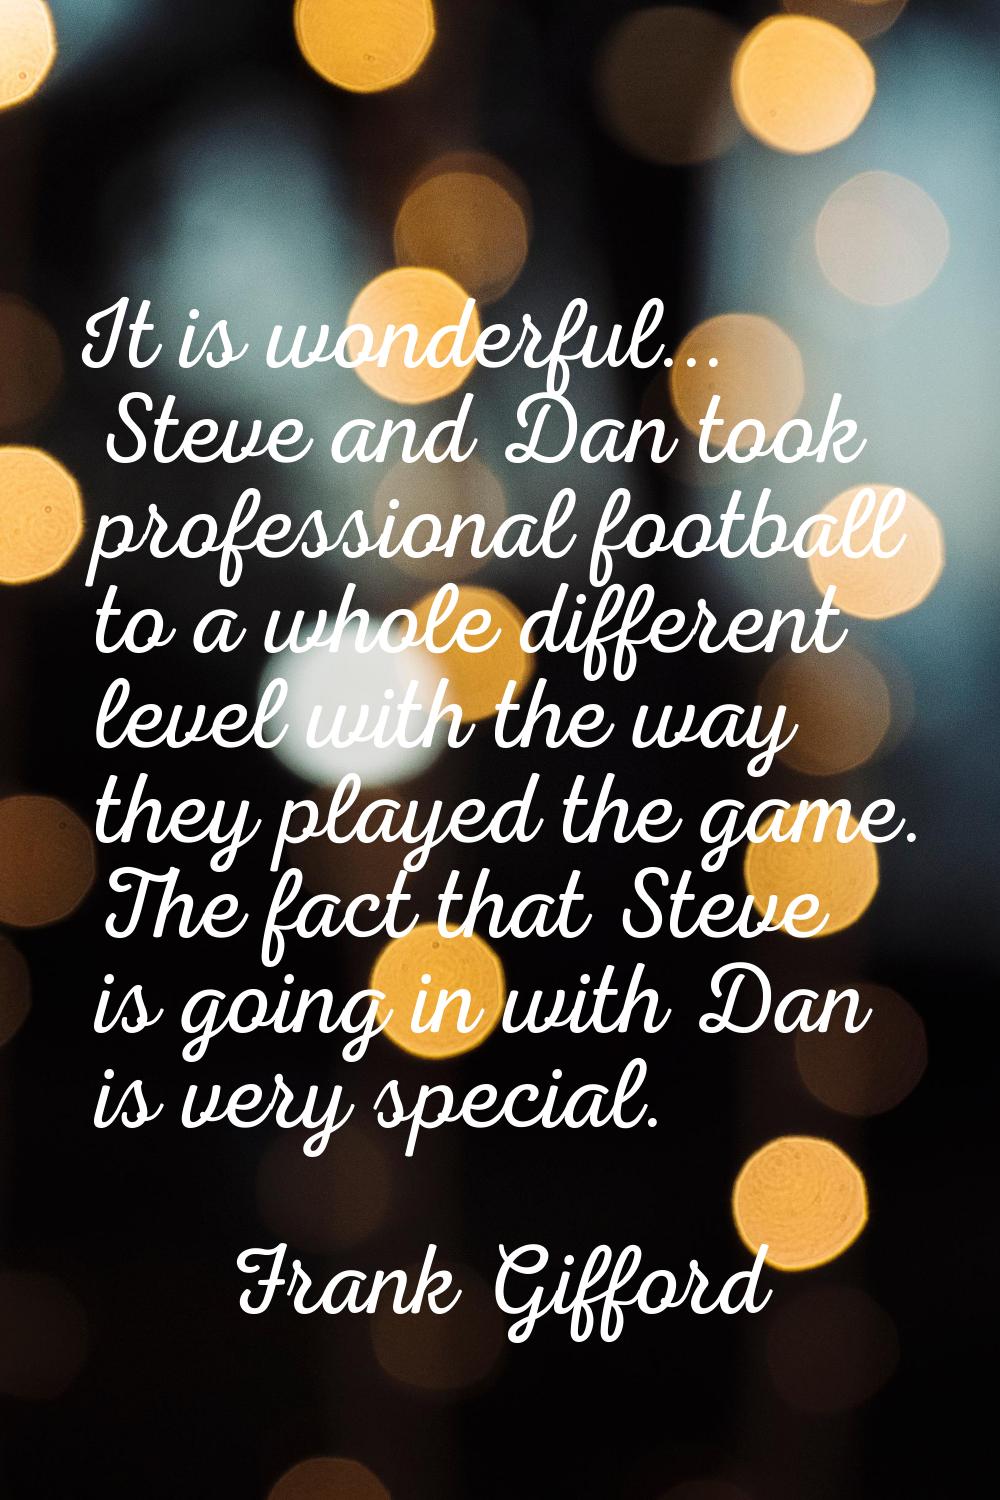 It is wonderful... Steve and Dan took professional football to a whole different level with the way